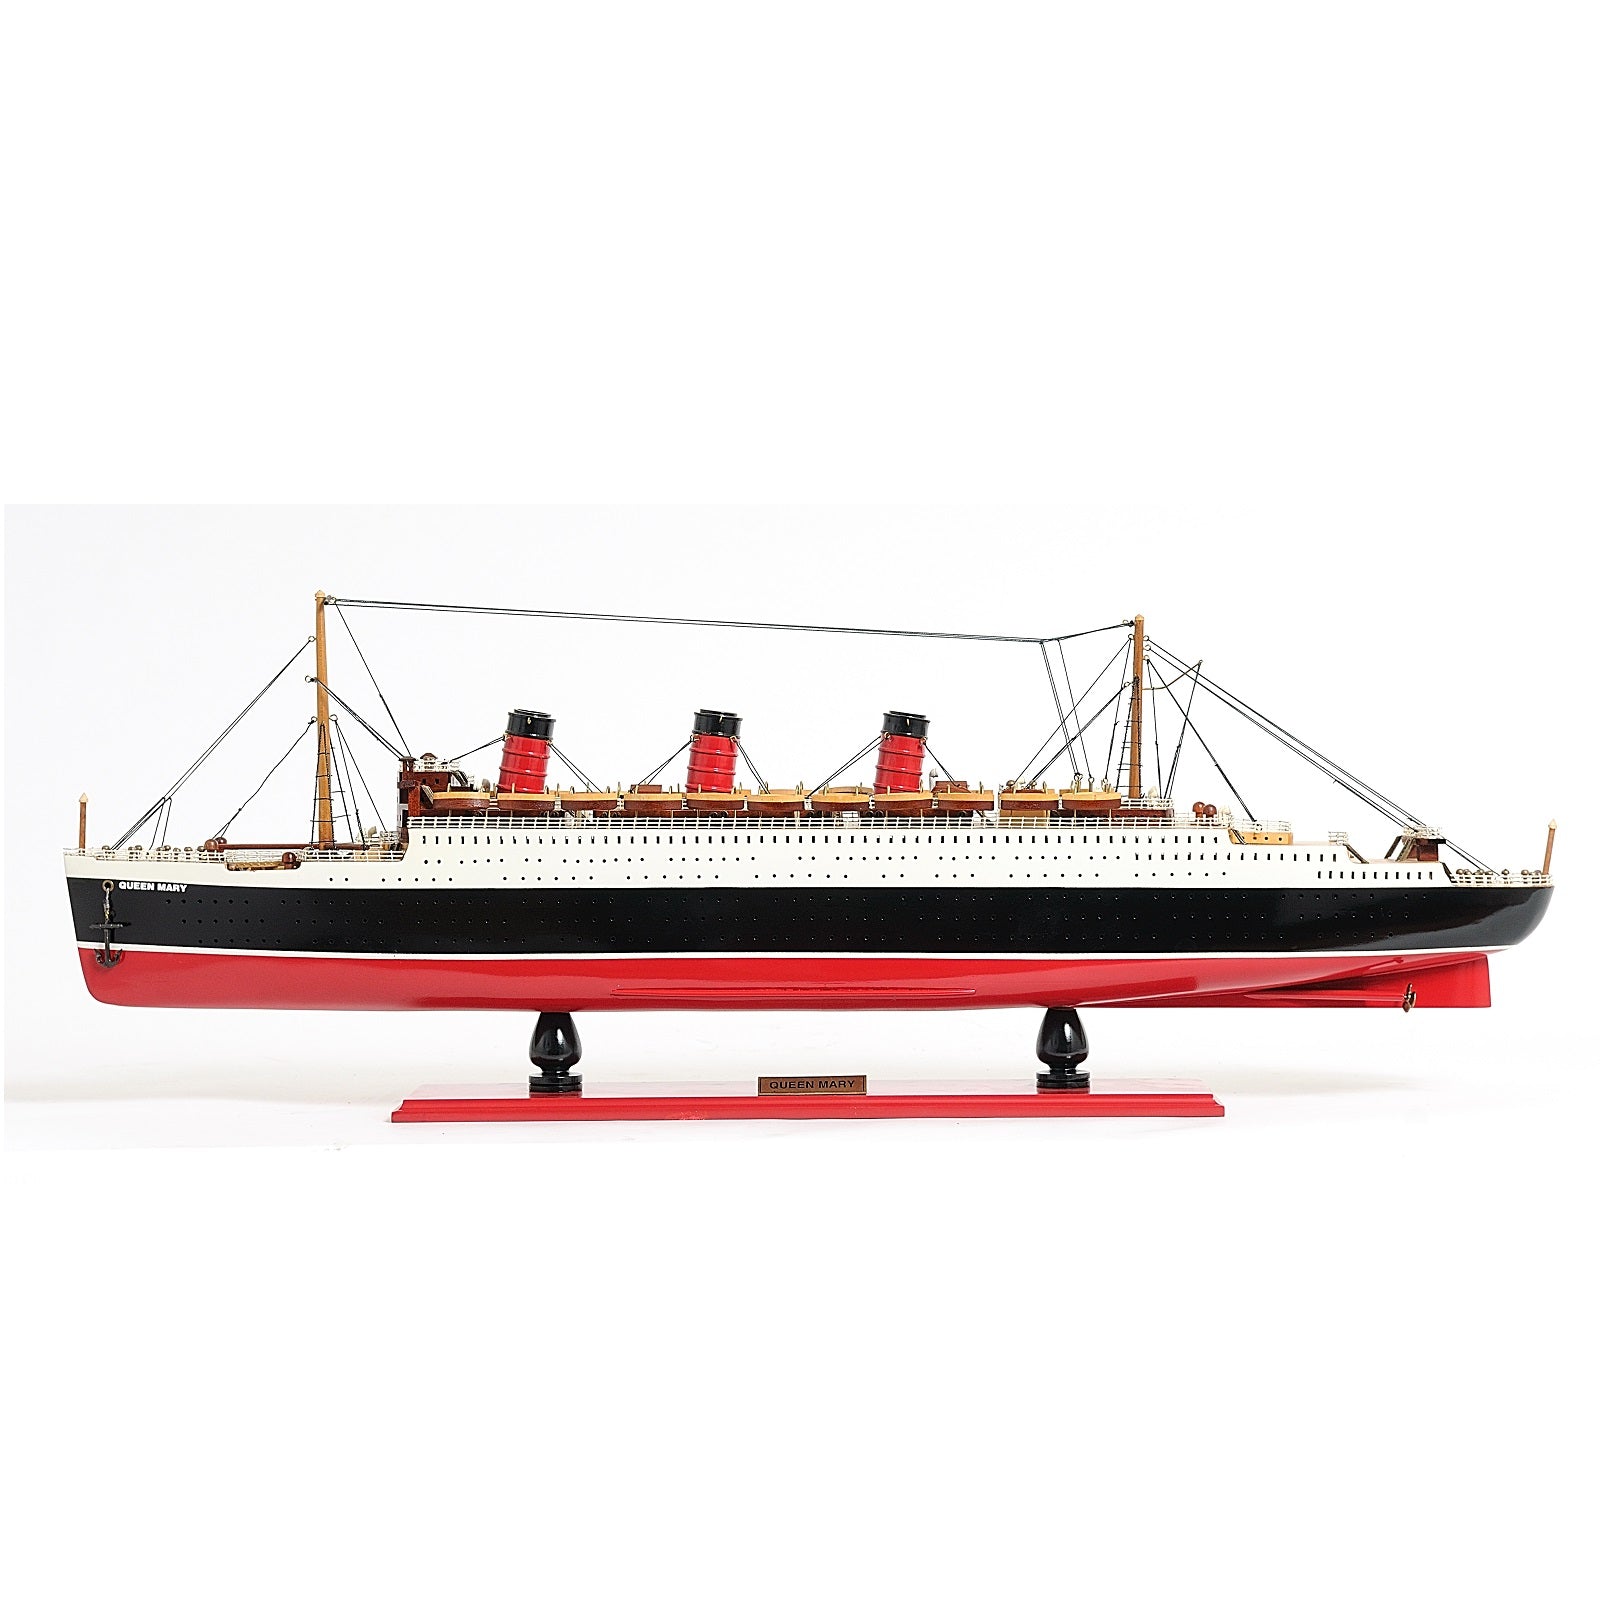 Queen Mary, Fully Assembled